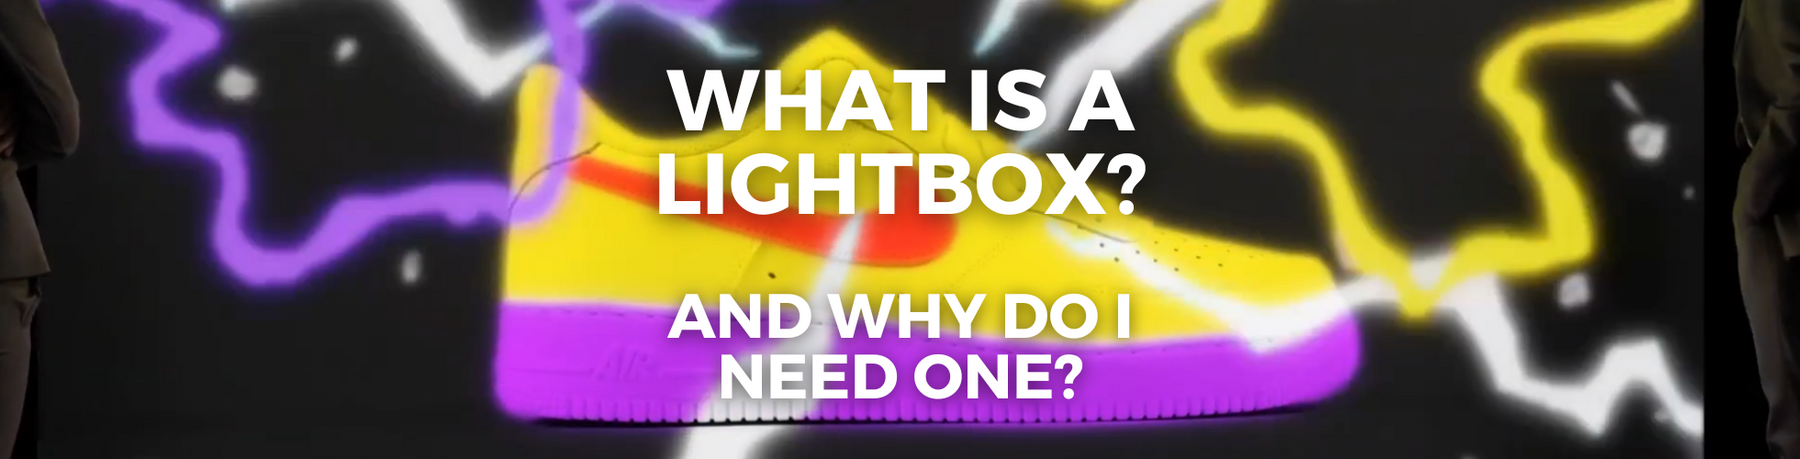 What is a Lightbox? And why do I need one for Trade Shows?